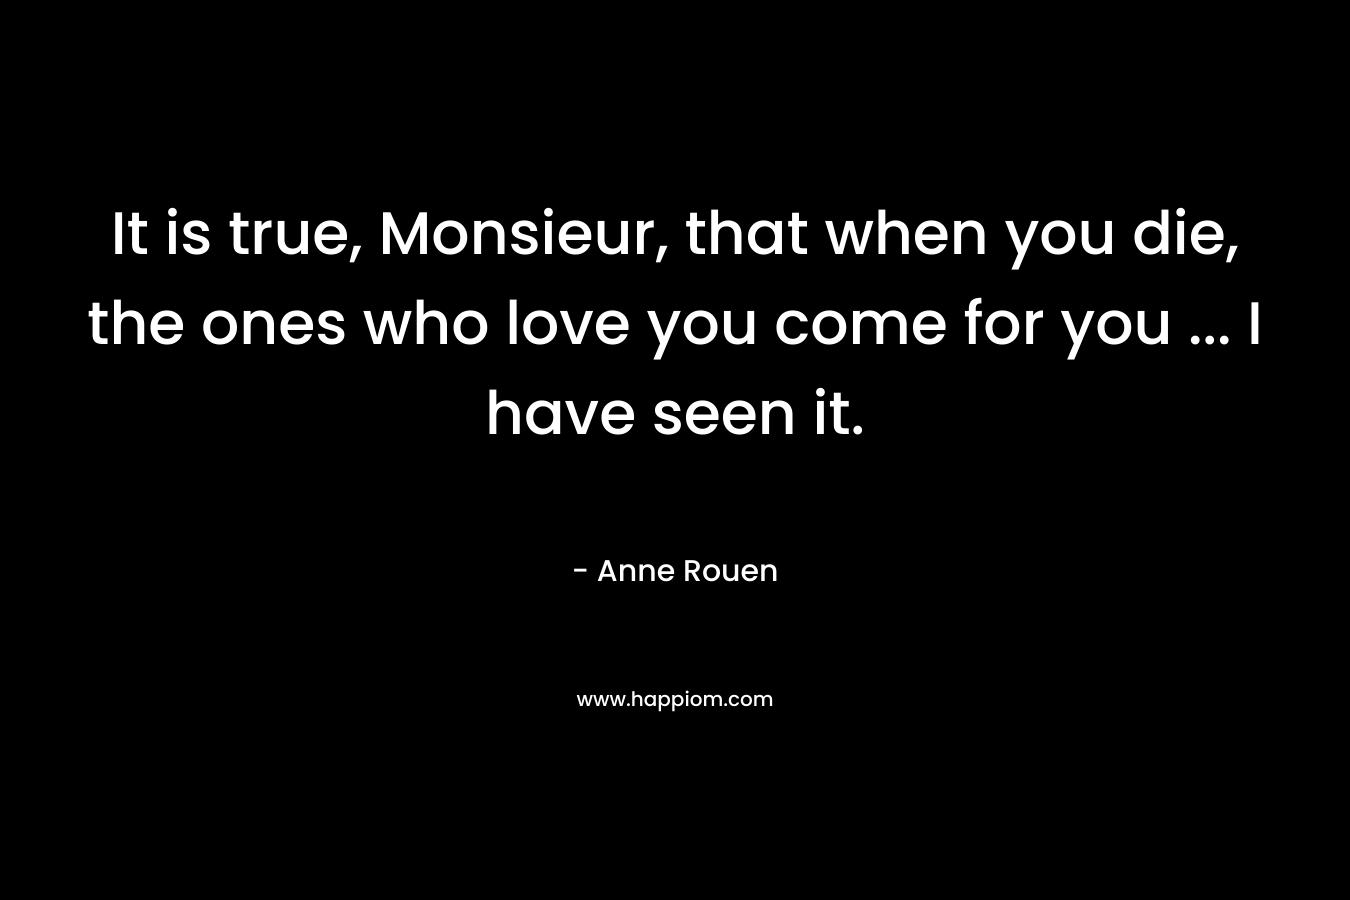 It is true, Monsieur, that when you die, the ones who love you come for you … I have seen it. – Anne Rouen